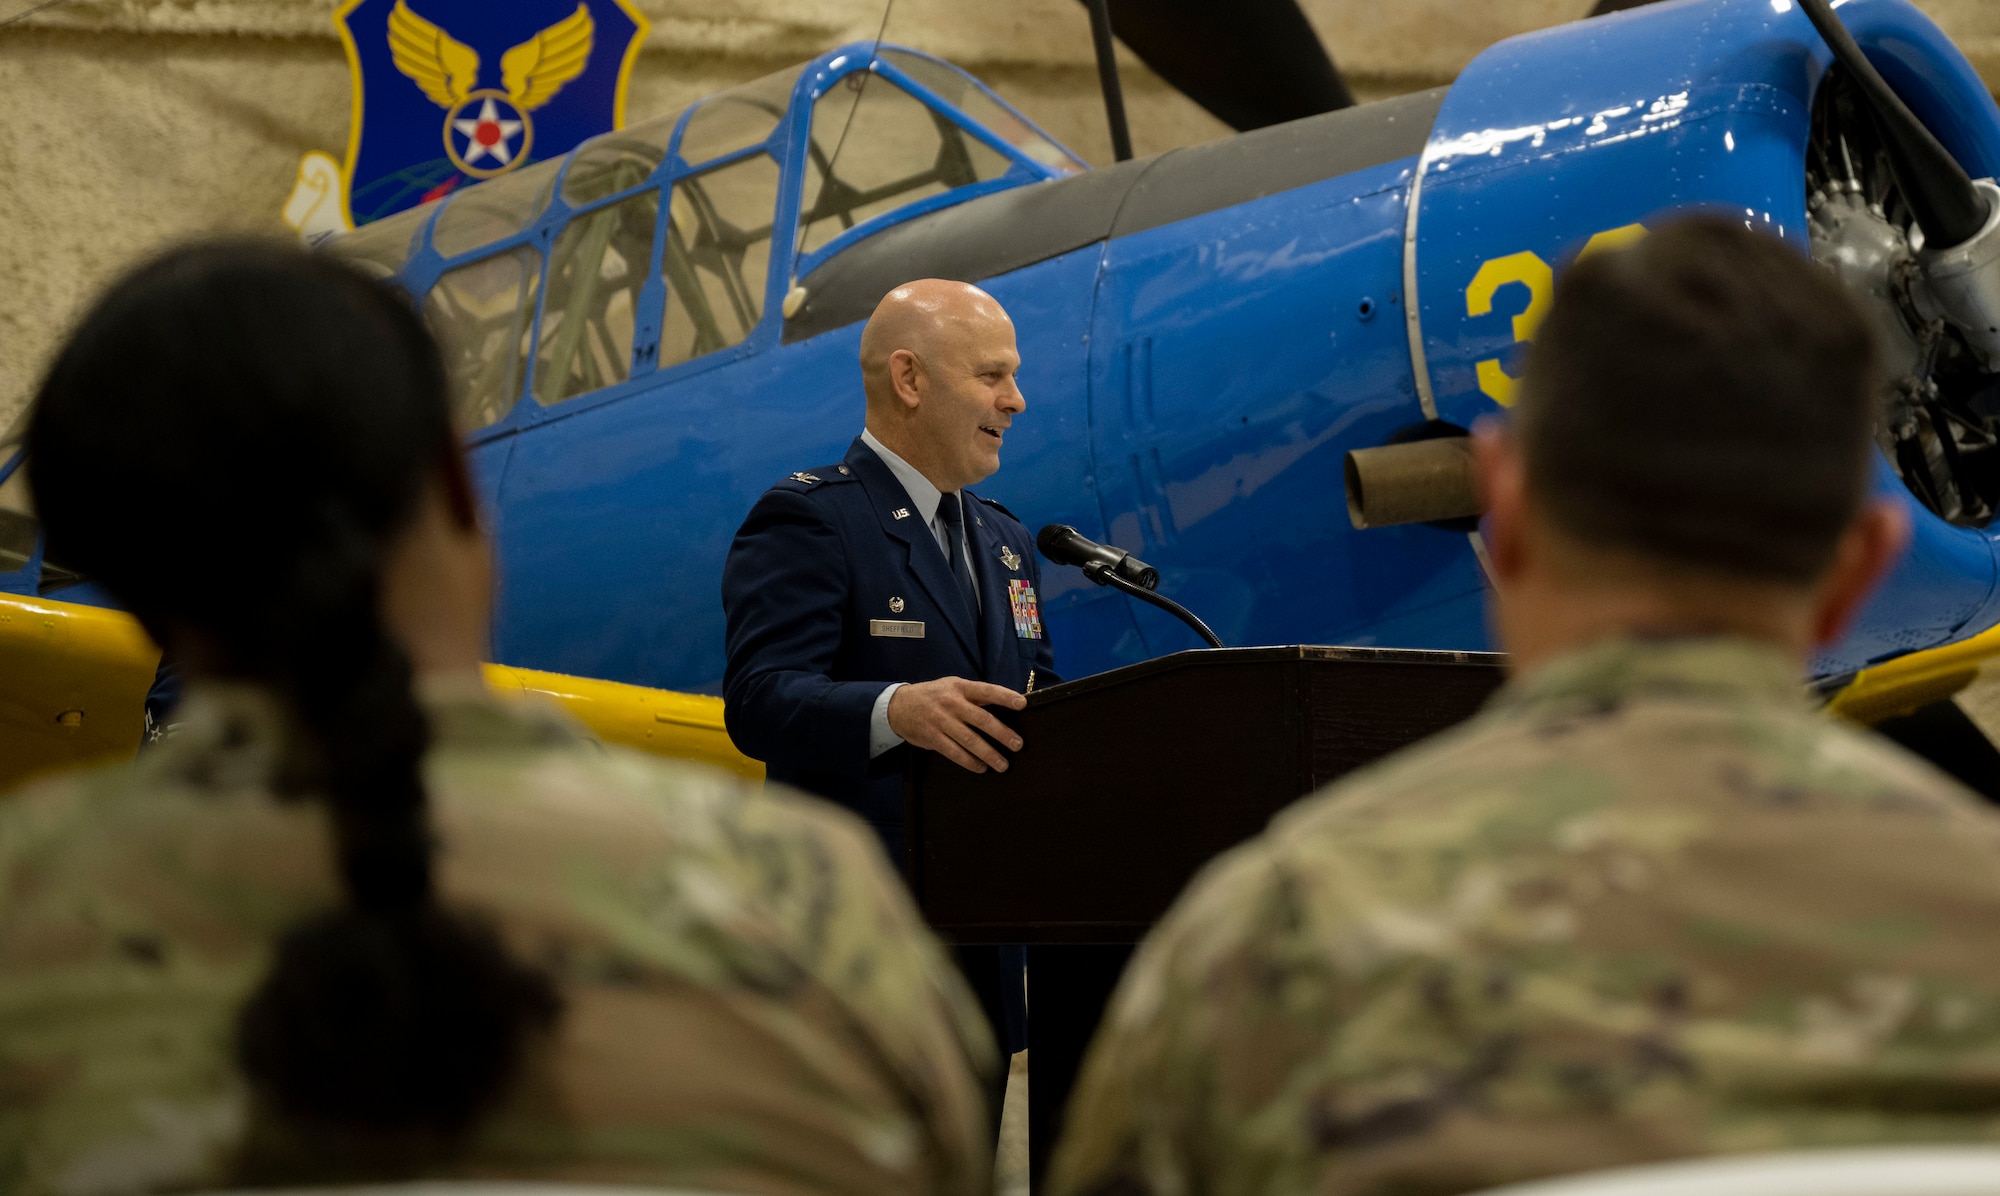 U.S. Air Force Col Joseph Sheffield, 28th Bomb Wing commander, gives a speech during a change of command at Ellsworth Air Force Base, South Dakota, June 15, 2023.